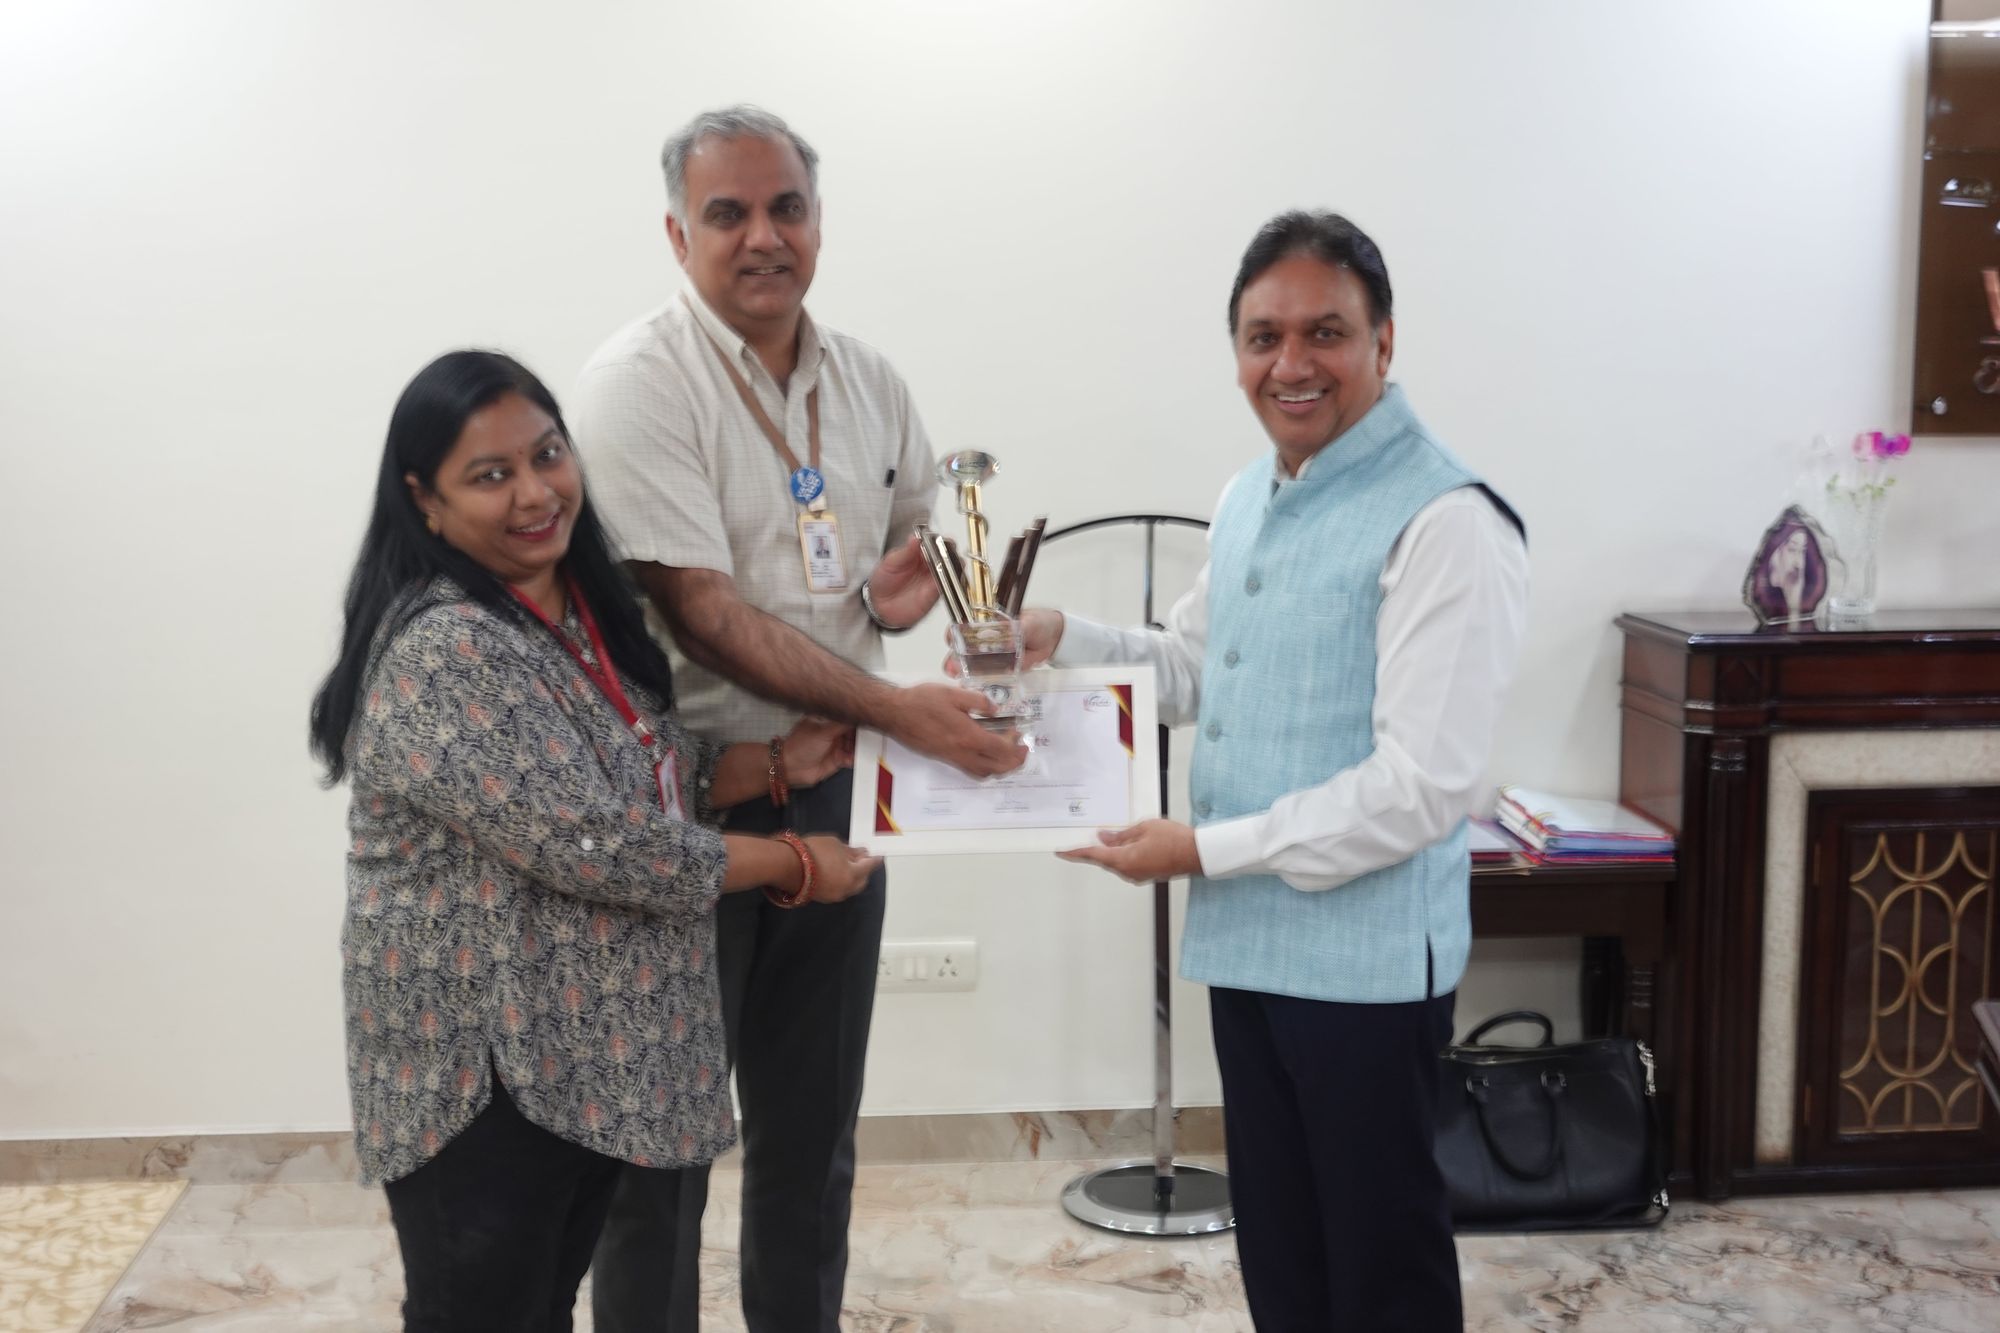 Venus Remedies Honored with FICCI Healthcare Awards 2023!